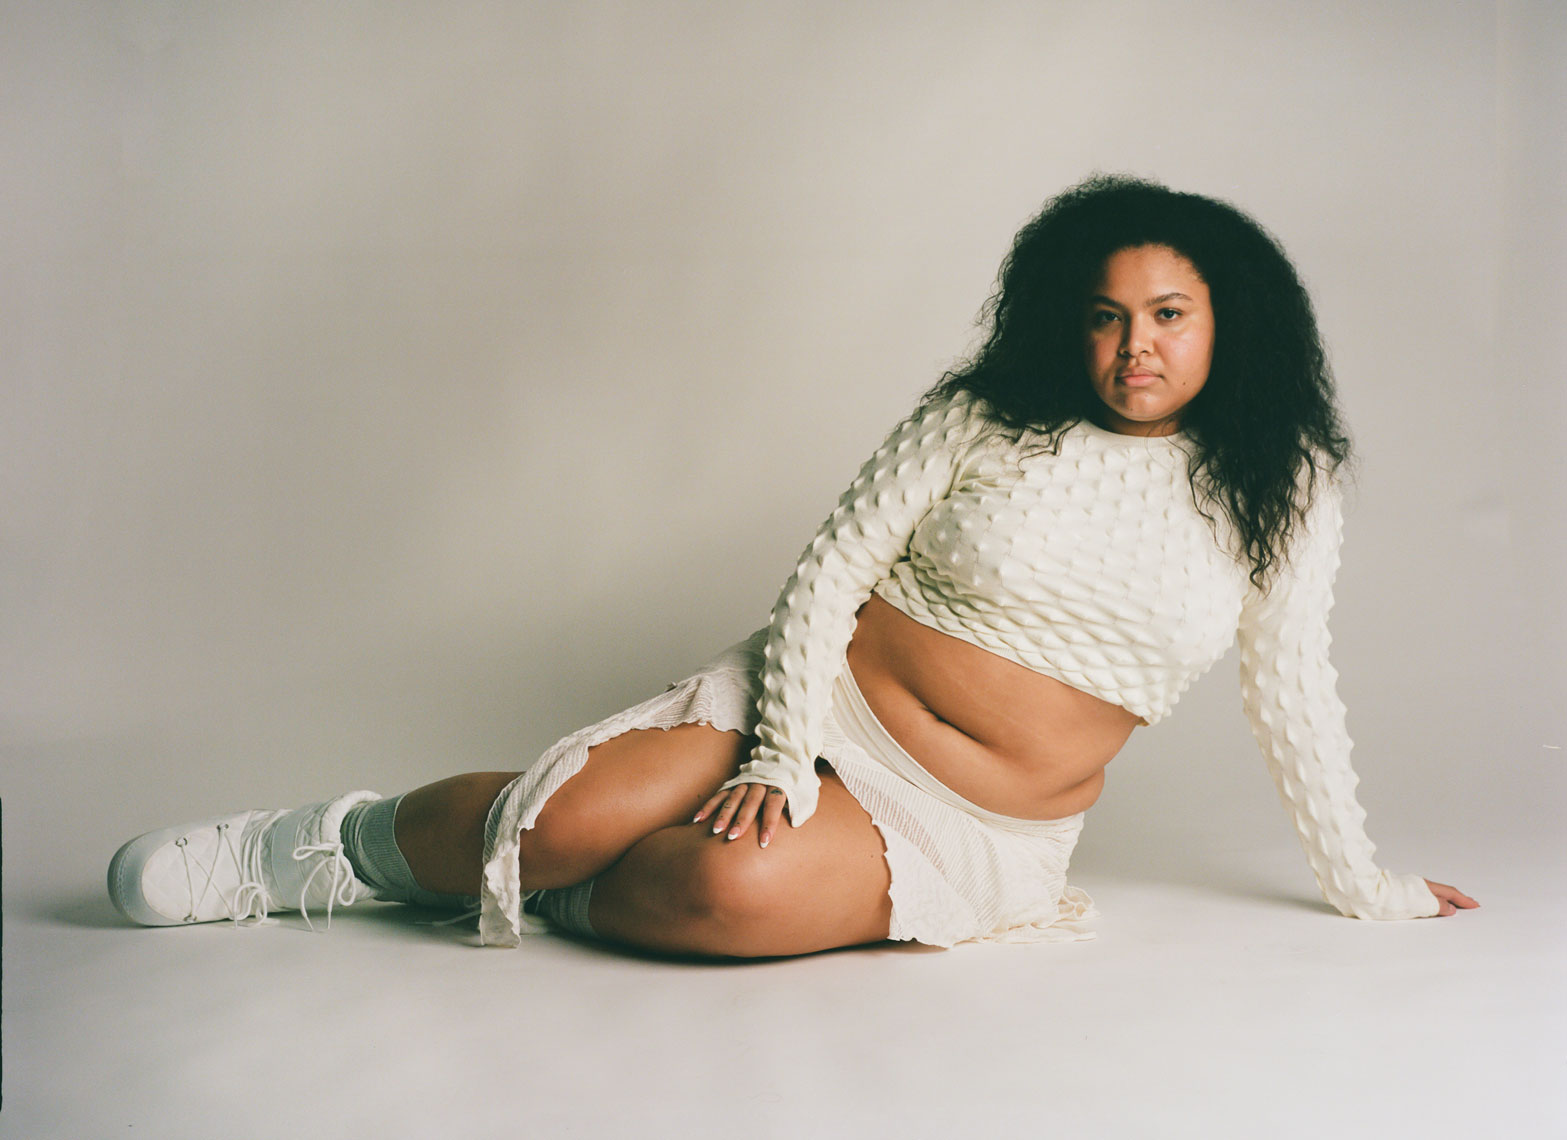 issie-gibbons-fashion-stylist-plus-size-lingerie-snow-white-afro-hair-beauty-fashion